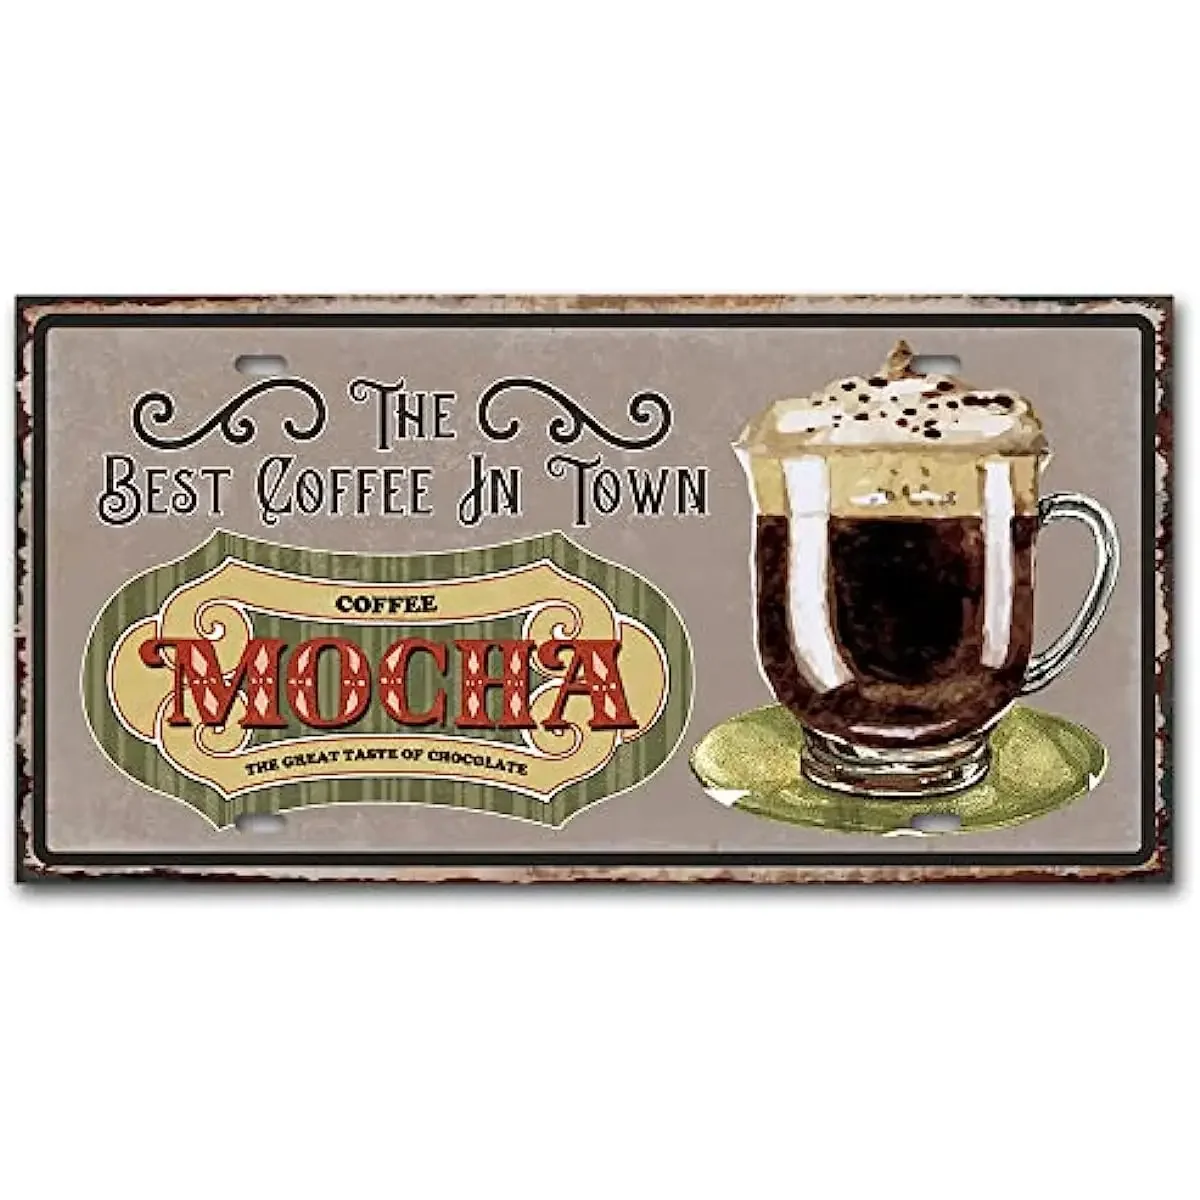 

Vintage Design The Best Coffee In Town Coffee Mochatin Metal Signs Wall Decor posters Art Tin Sign Car License 6 x 12 Inch